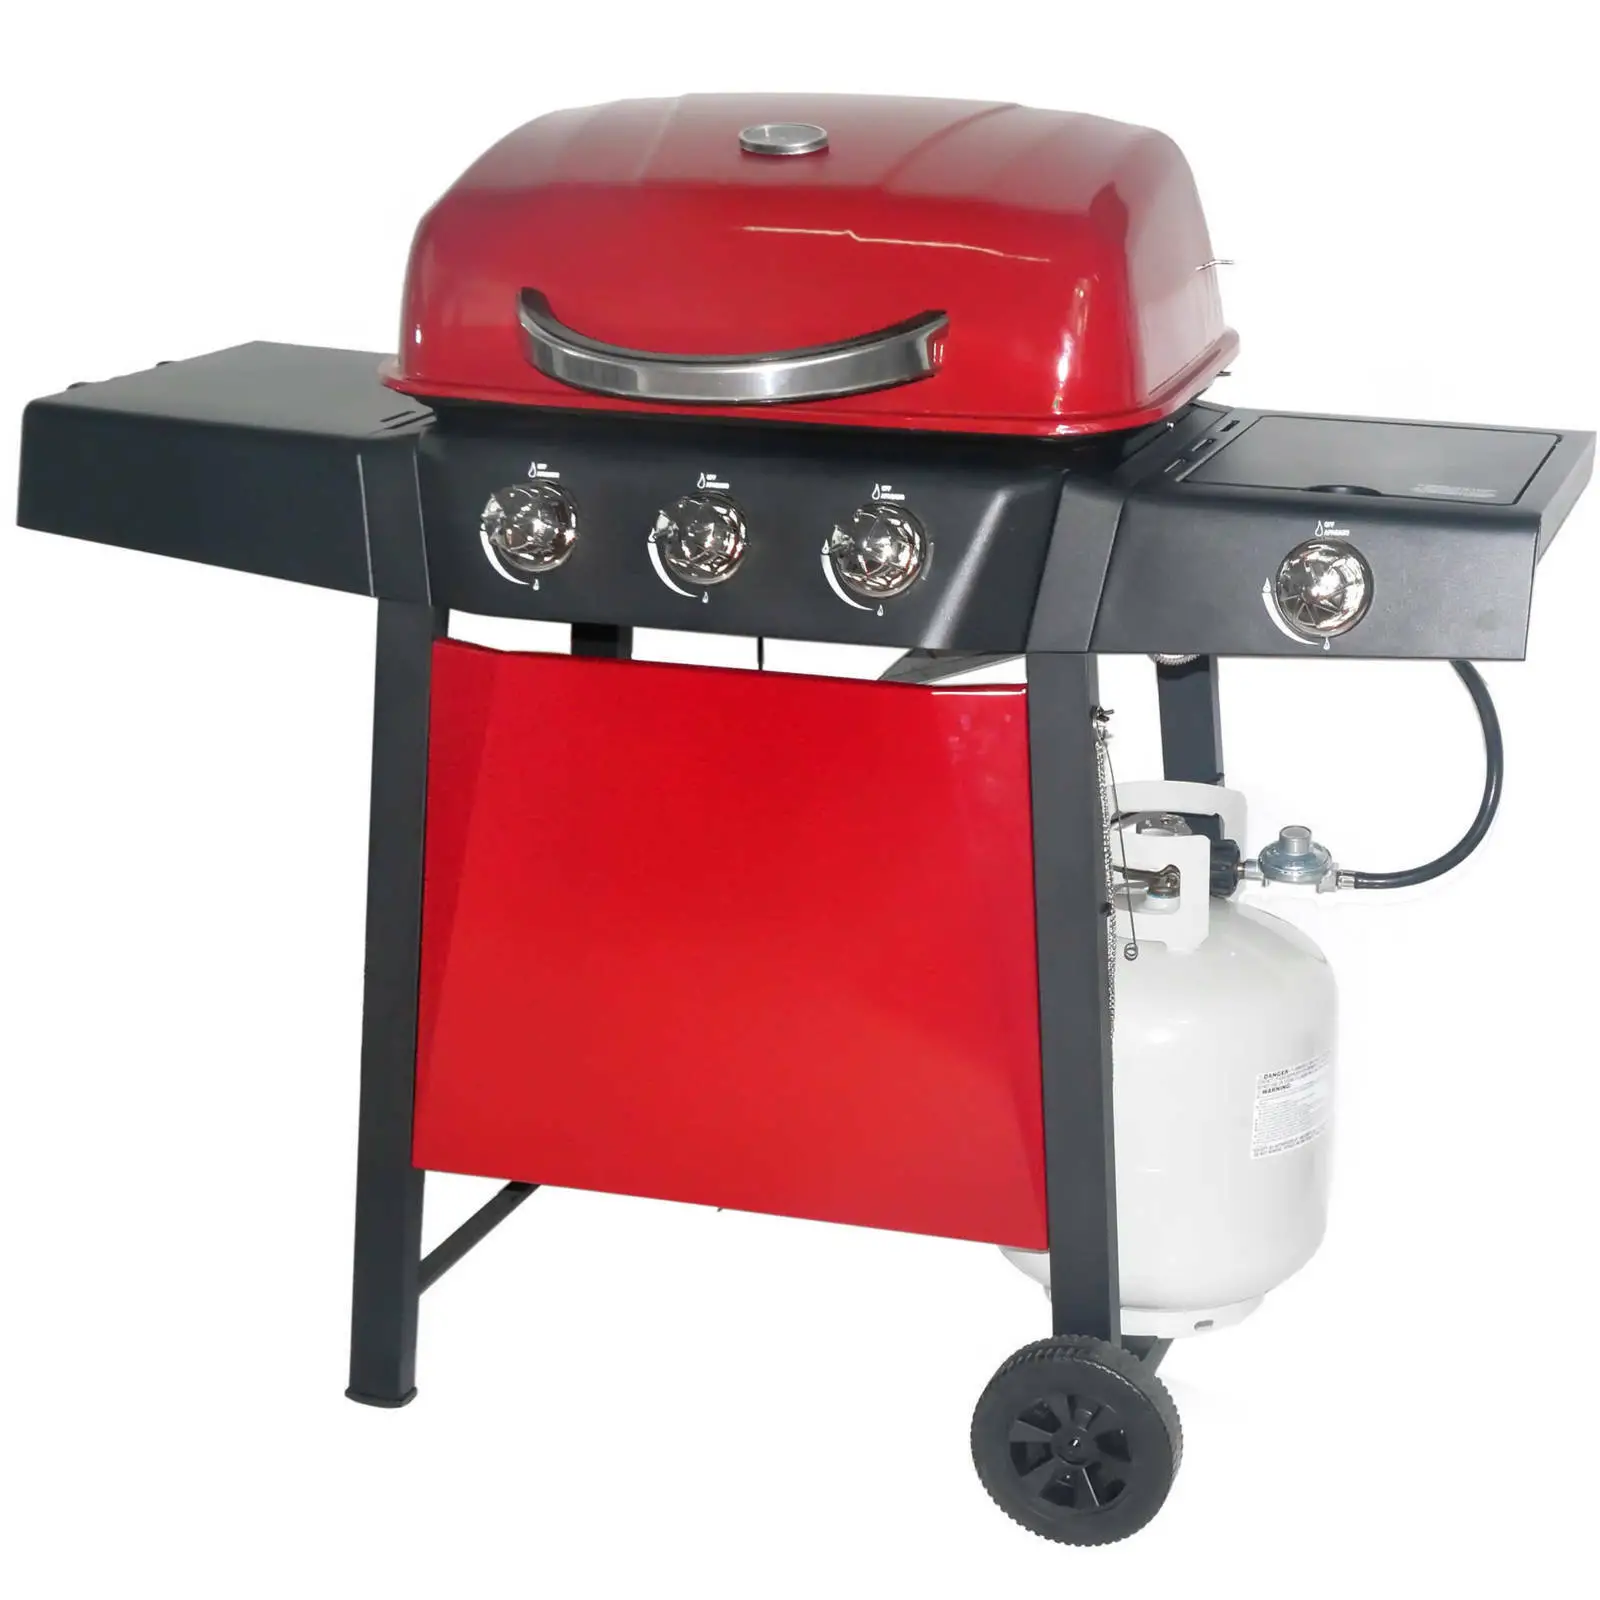 Propane Gas Grill 3 Burners Backyard Barbecue Outdoor Cooking w/ Side ...